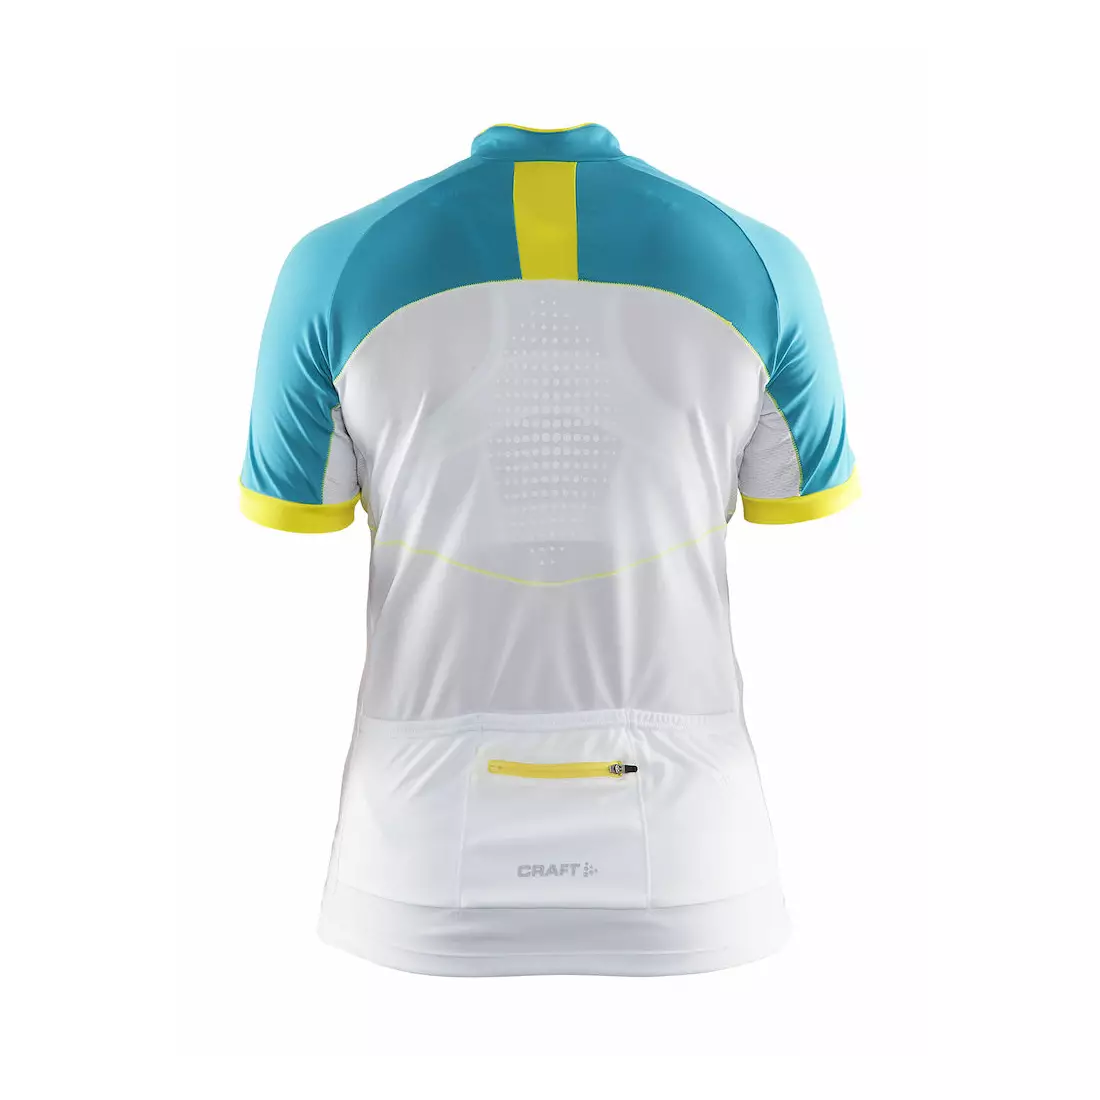 CRAFT MOVE women's cycling jersey 1903270-2305